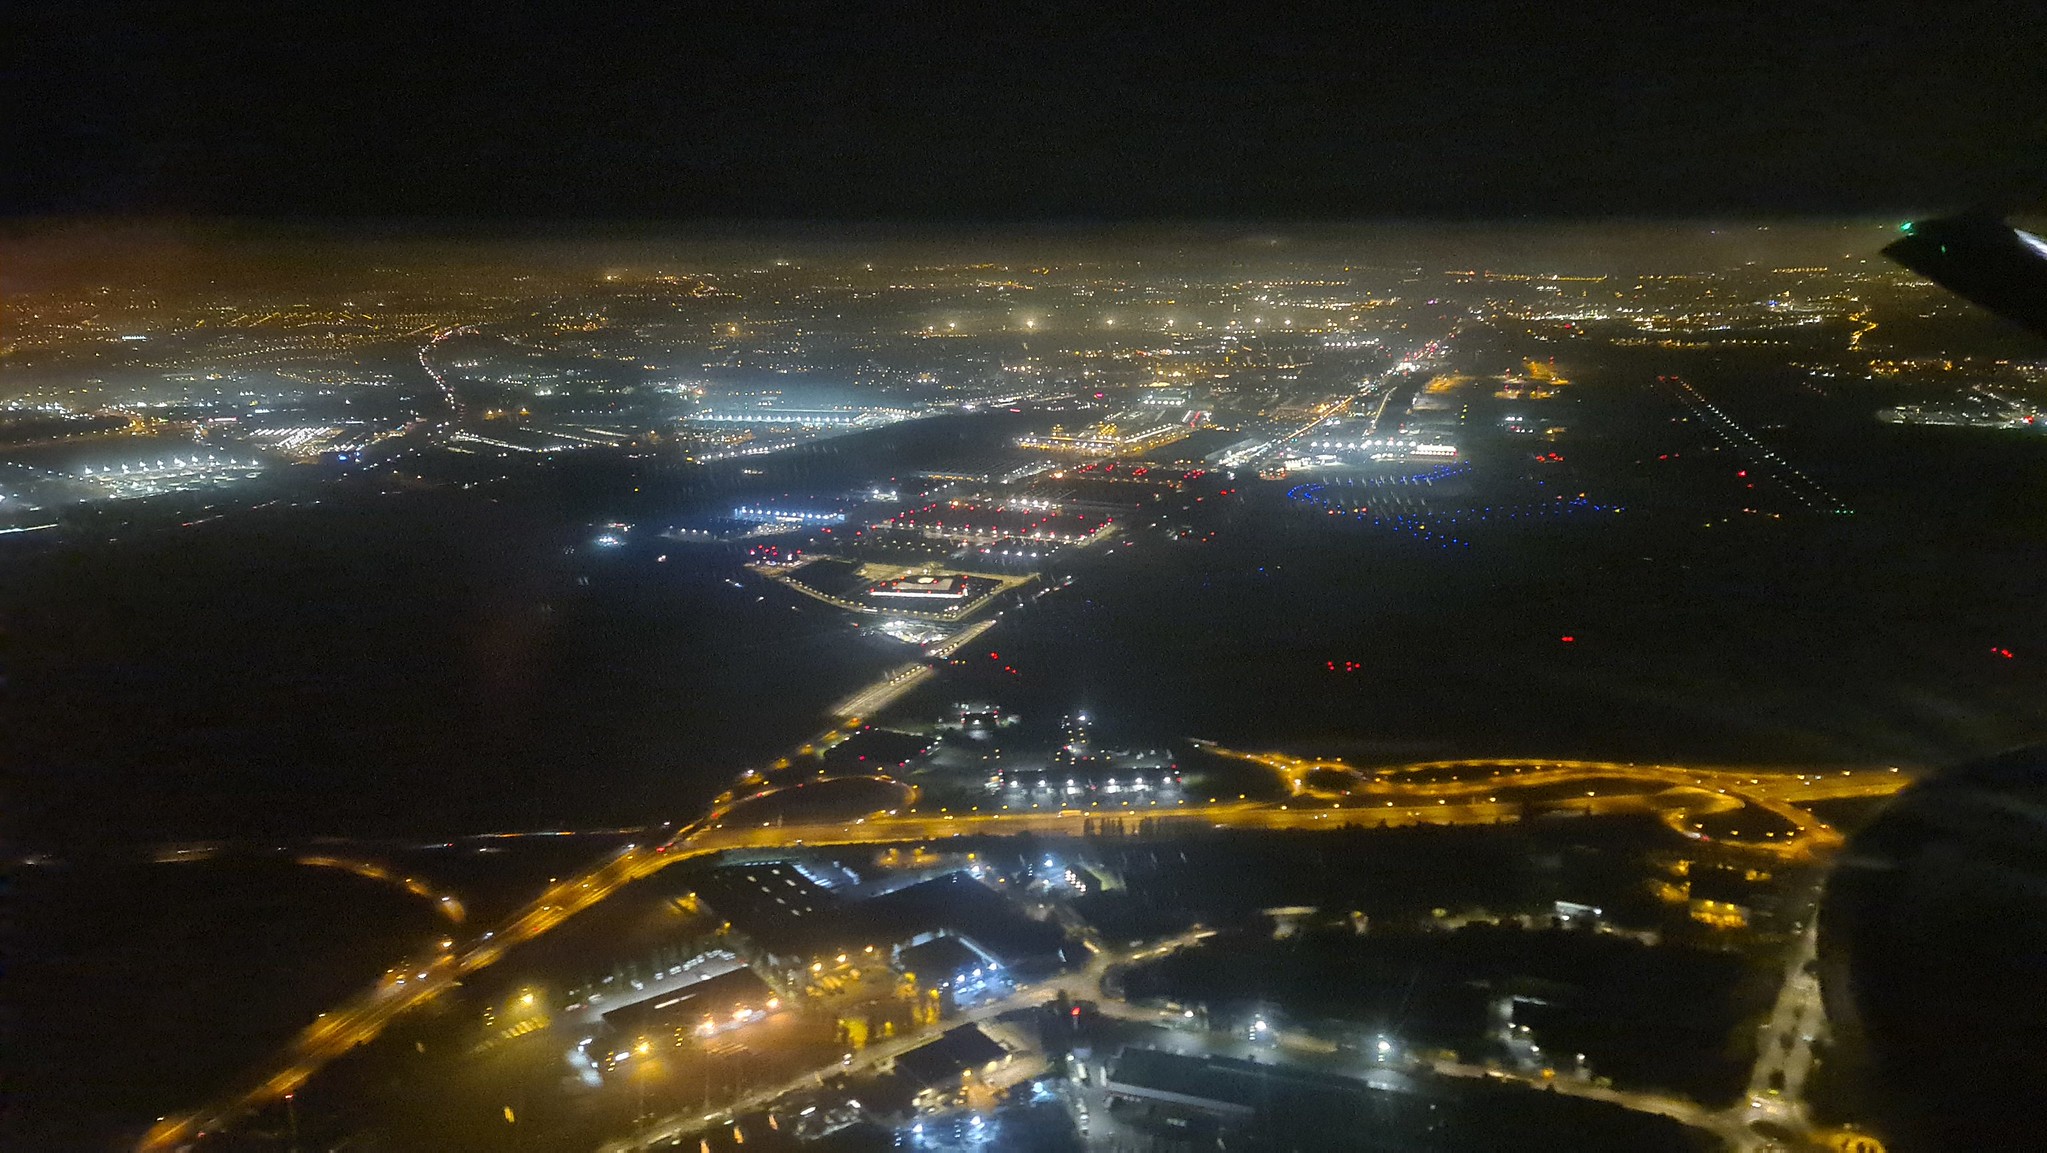 The view over Paris on the way into CDG